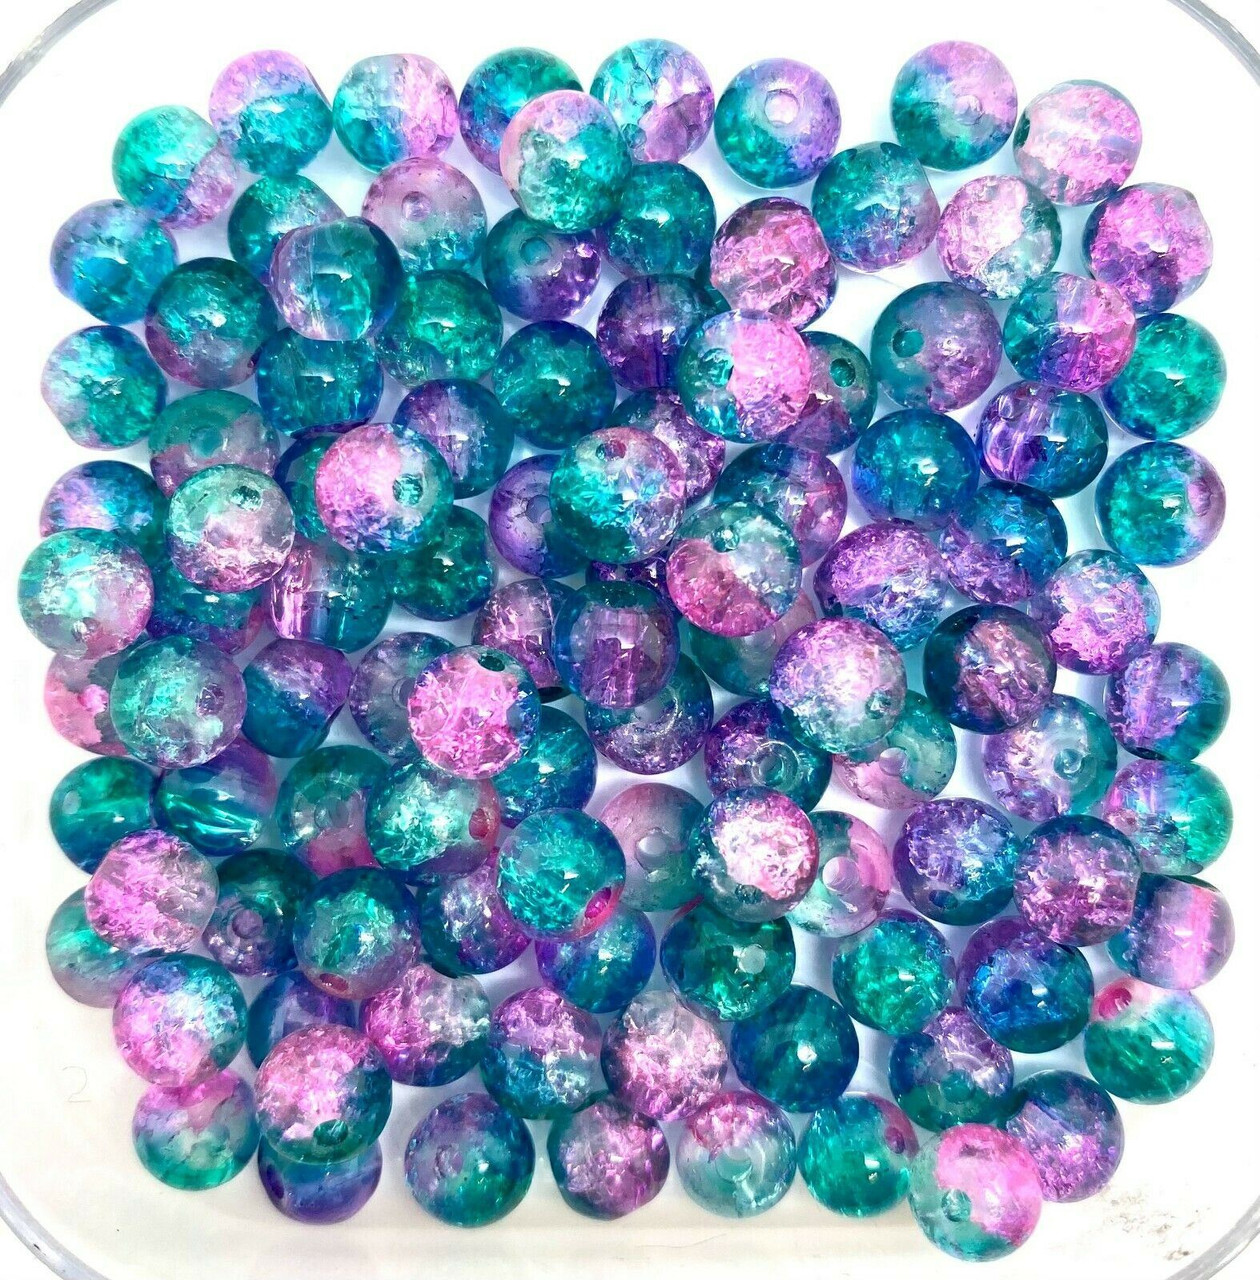 4mm Crackle Glass Beads - Pink & Teal, 200 beads